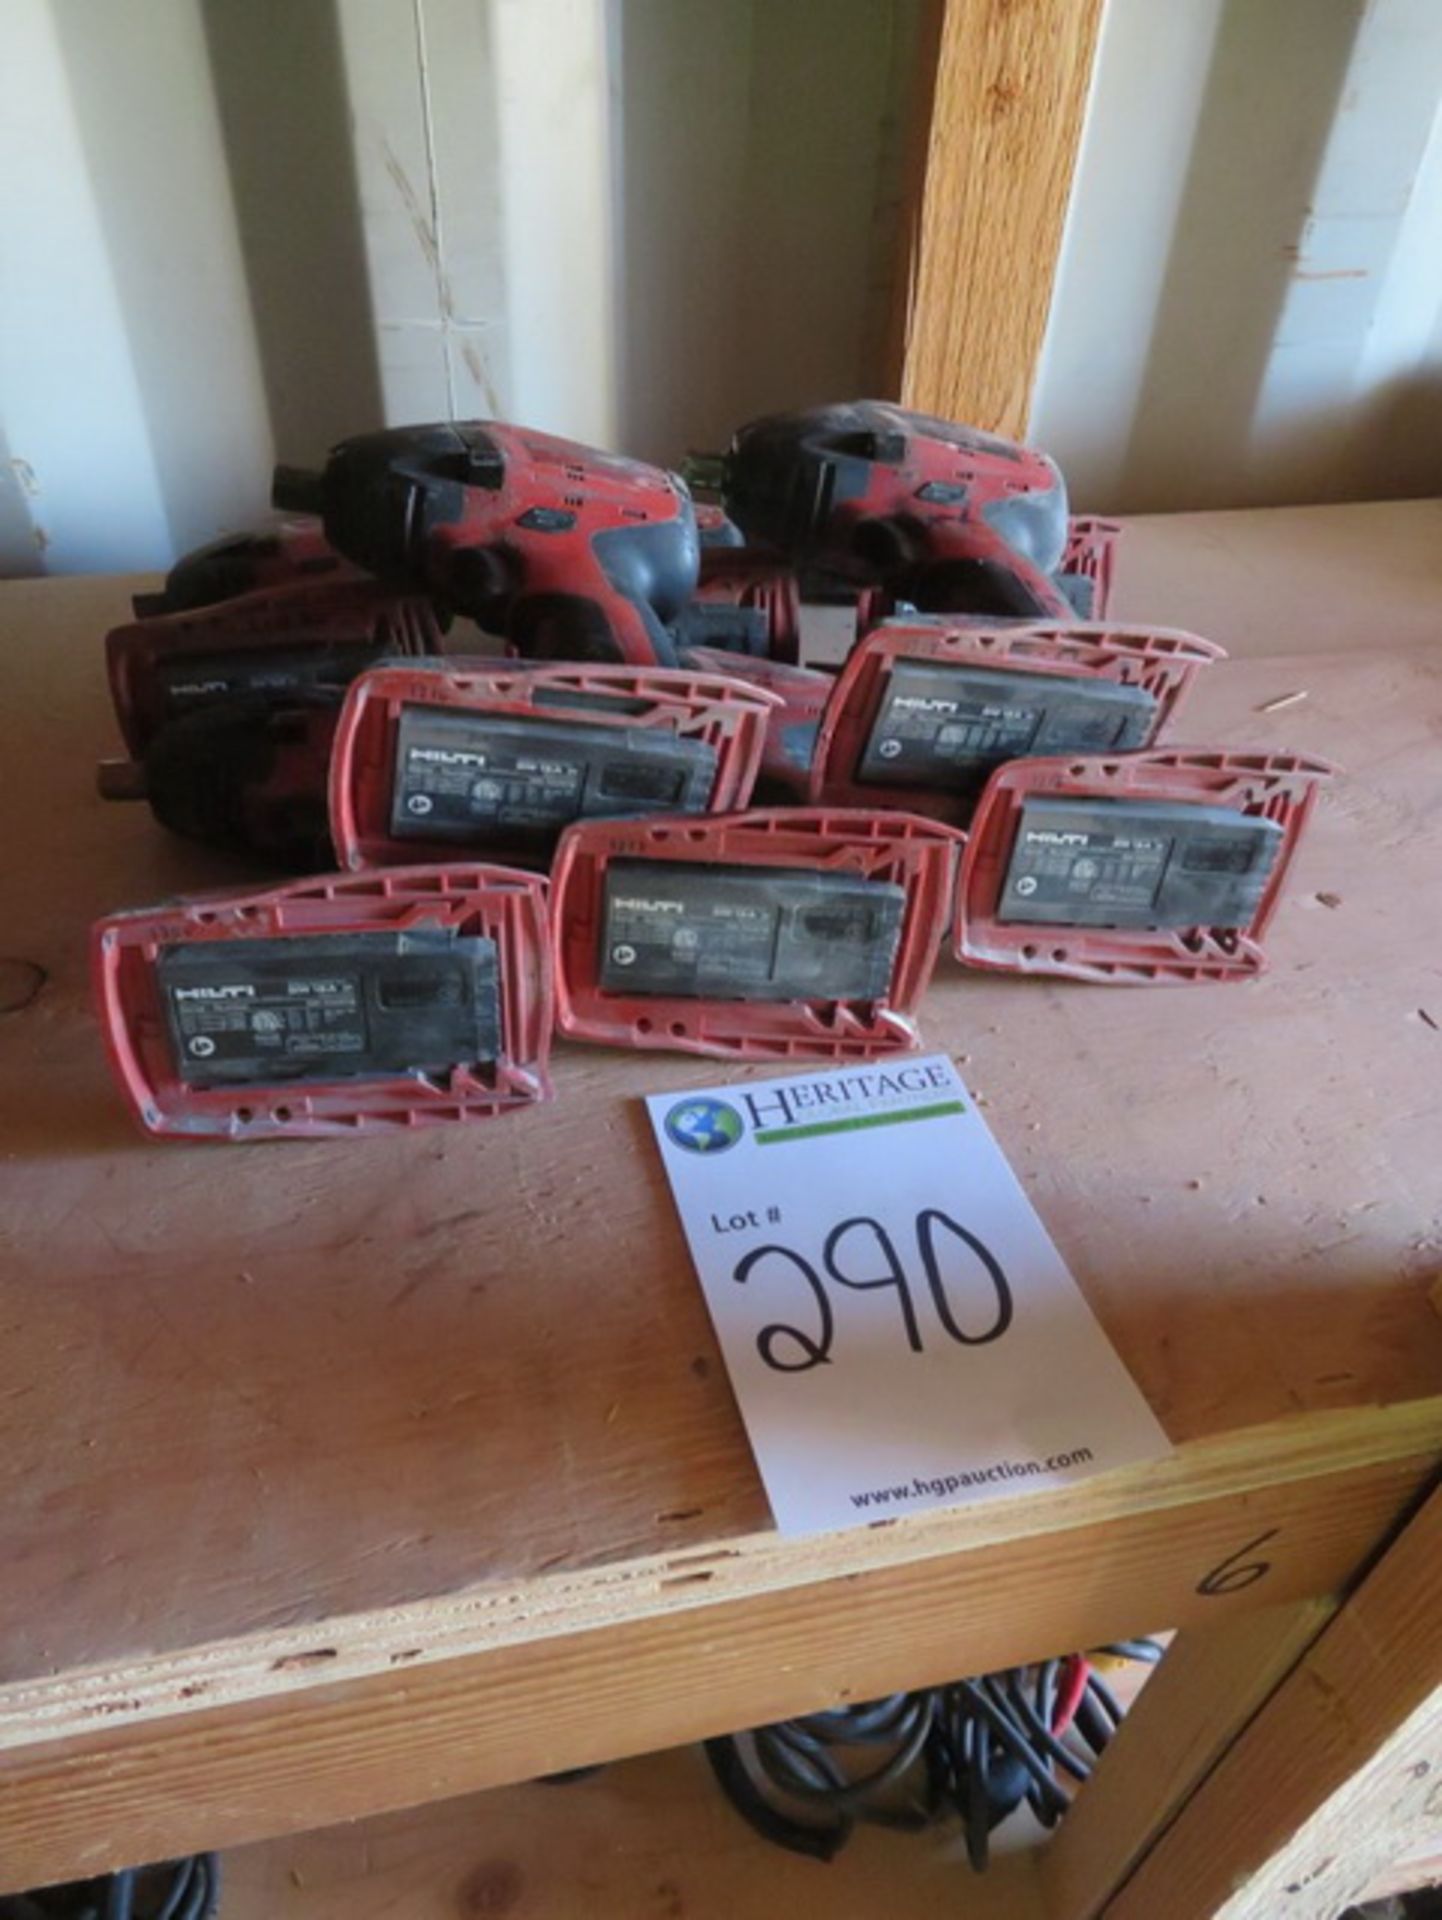 Hilti SIW-18-A Lot: (8) 1/2" 18V Cordless Impact Drivers. (Missing Batteries). Asset Located at